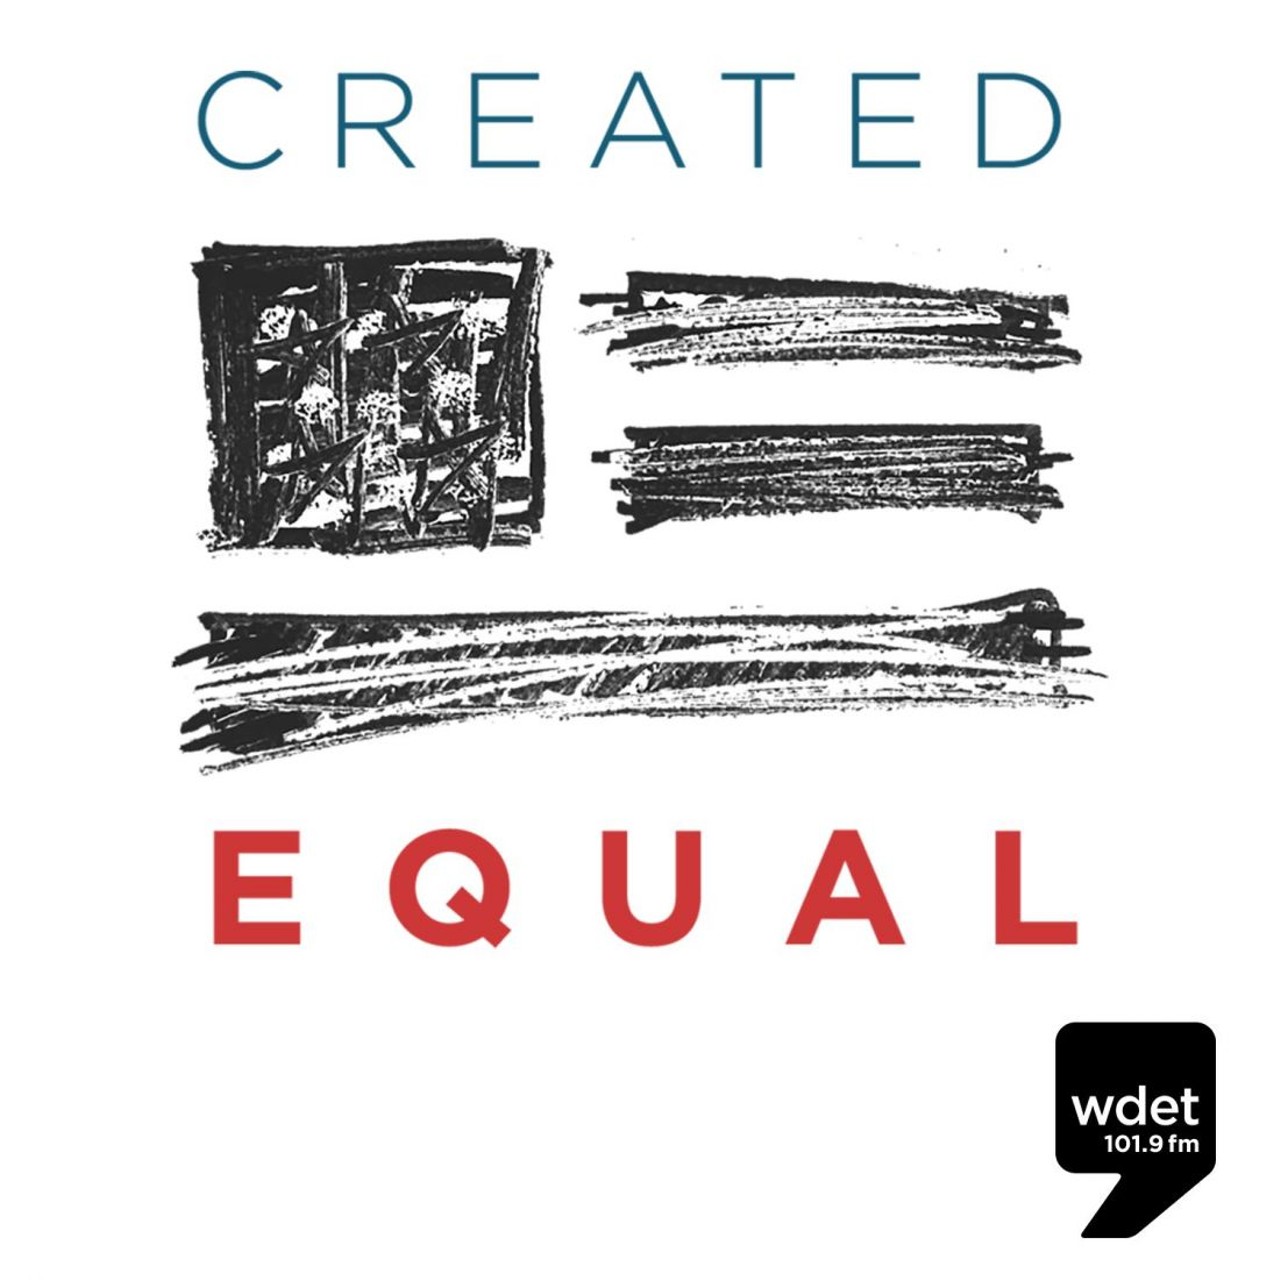  Created Equal  
This WDET-produced podcast brings together Pulitzer Prize-winning journalist, Stephen Henderson and producer Laura Weber-Davis to analyze inequality, racism, and other injustices in American society. Created Equal draws parallels between the United States&#146; history and current events to unearth the root causes of the inequalities the country is still plagued by. It's perfect for snowy days when you&#146;re in the mood to analyze your position in society, how it affects those around you, and how your ancestors contributed to your privilege. 
Photo via WDET.org 